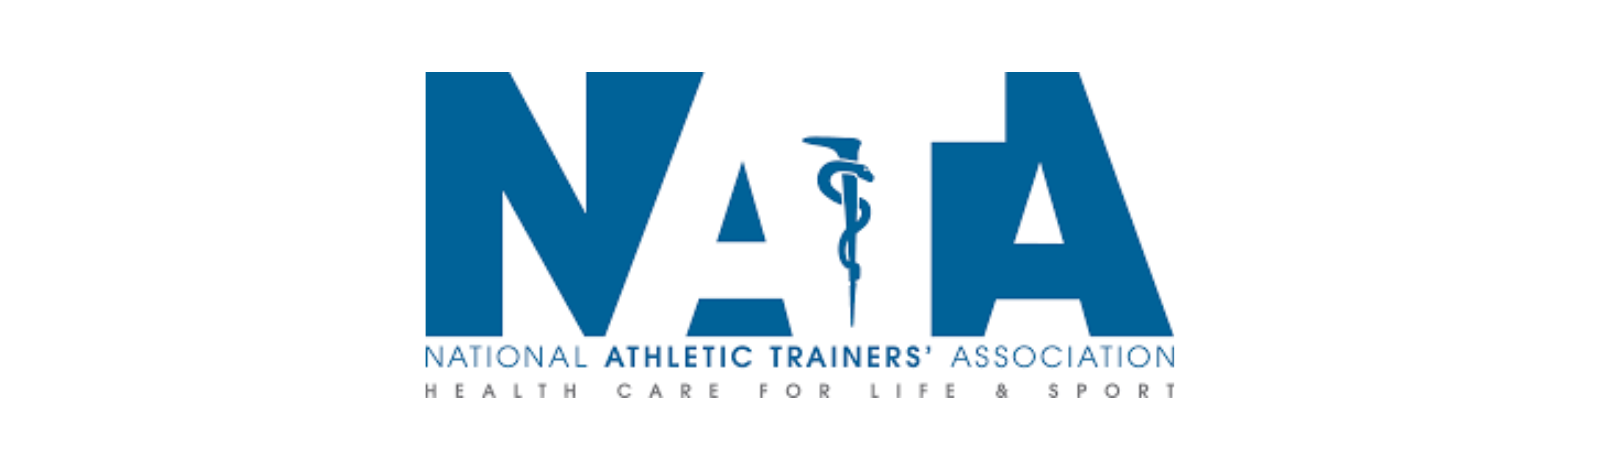 National Athletic Trainers Association NATA